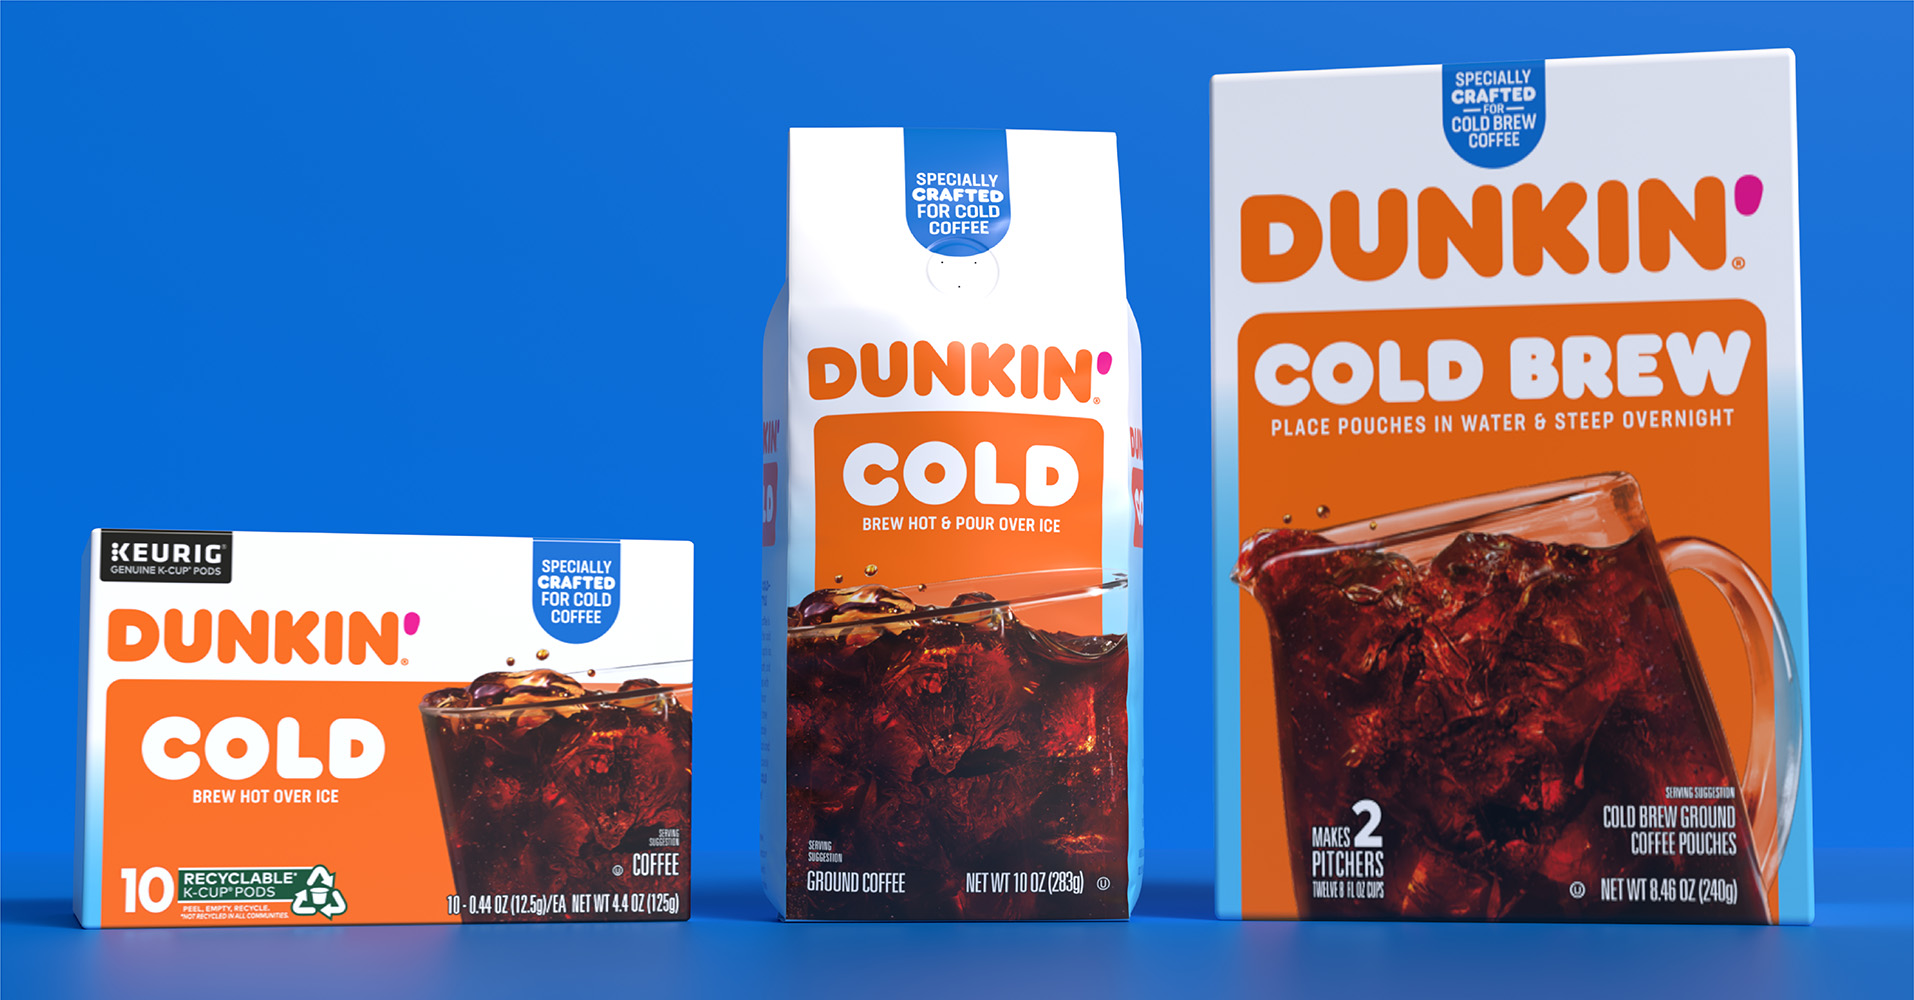 Dunkin' Cold Coffee package design